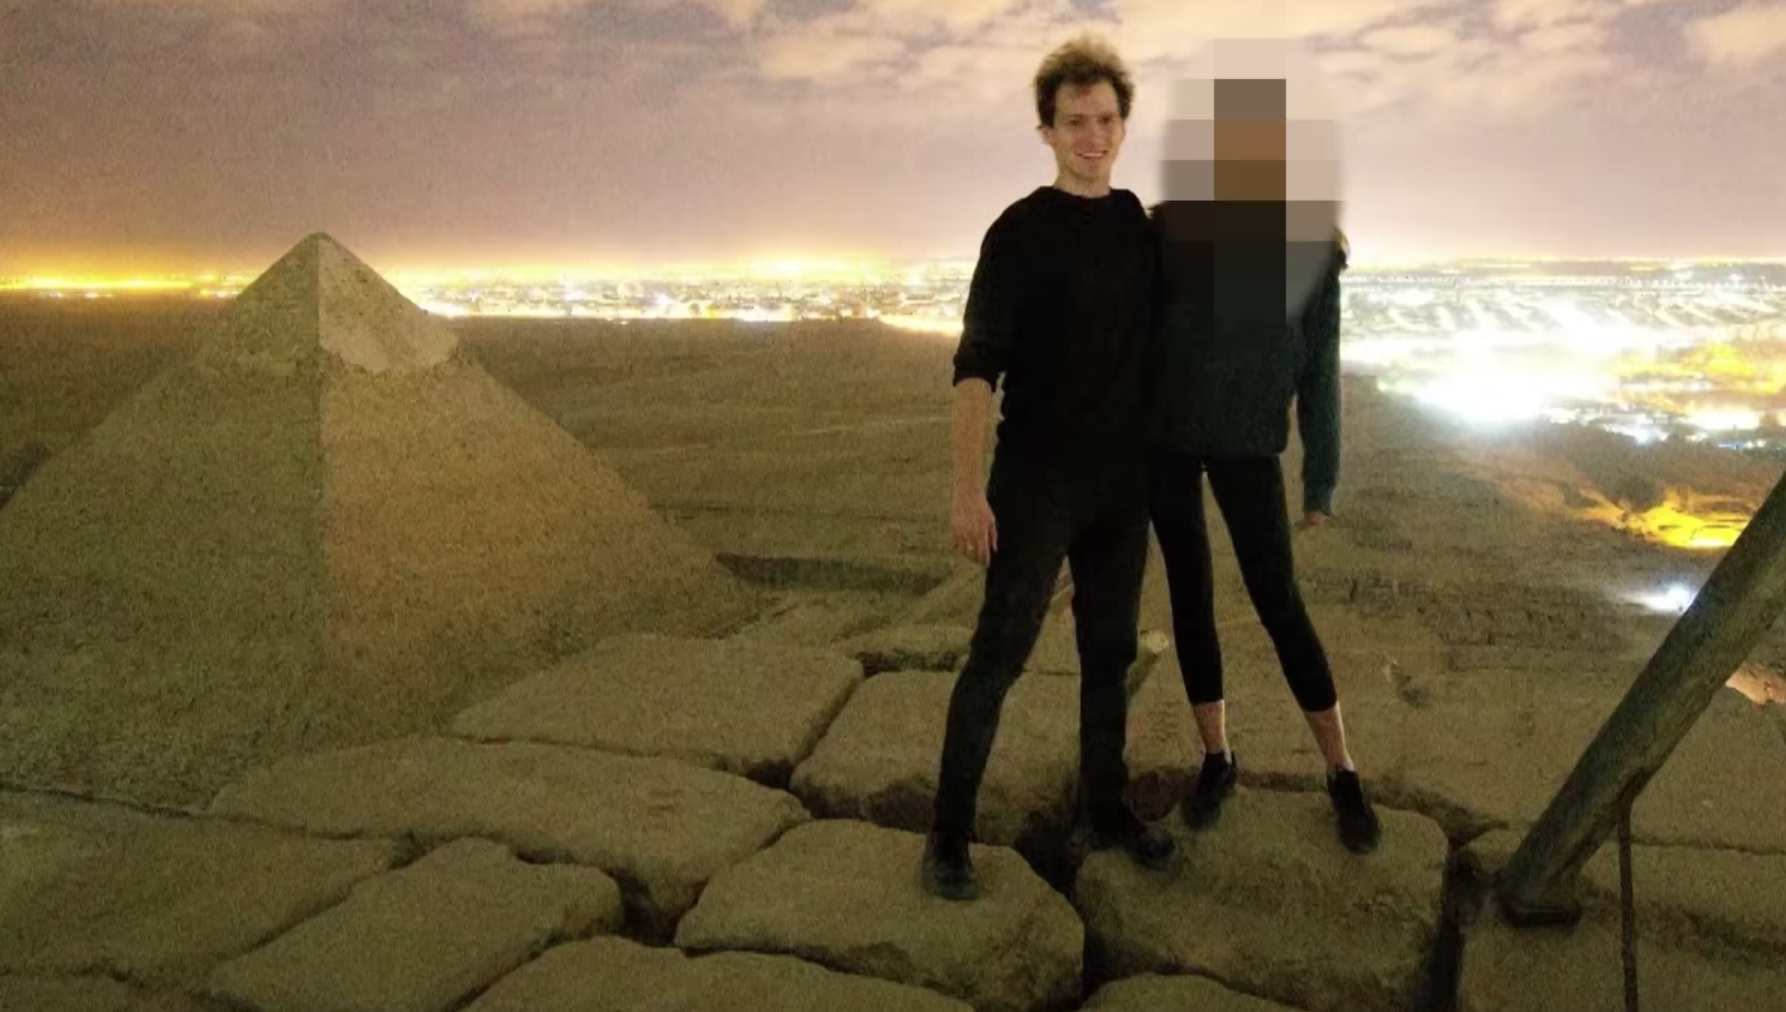 French couple fucking on great pyramid